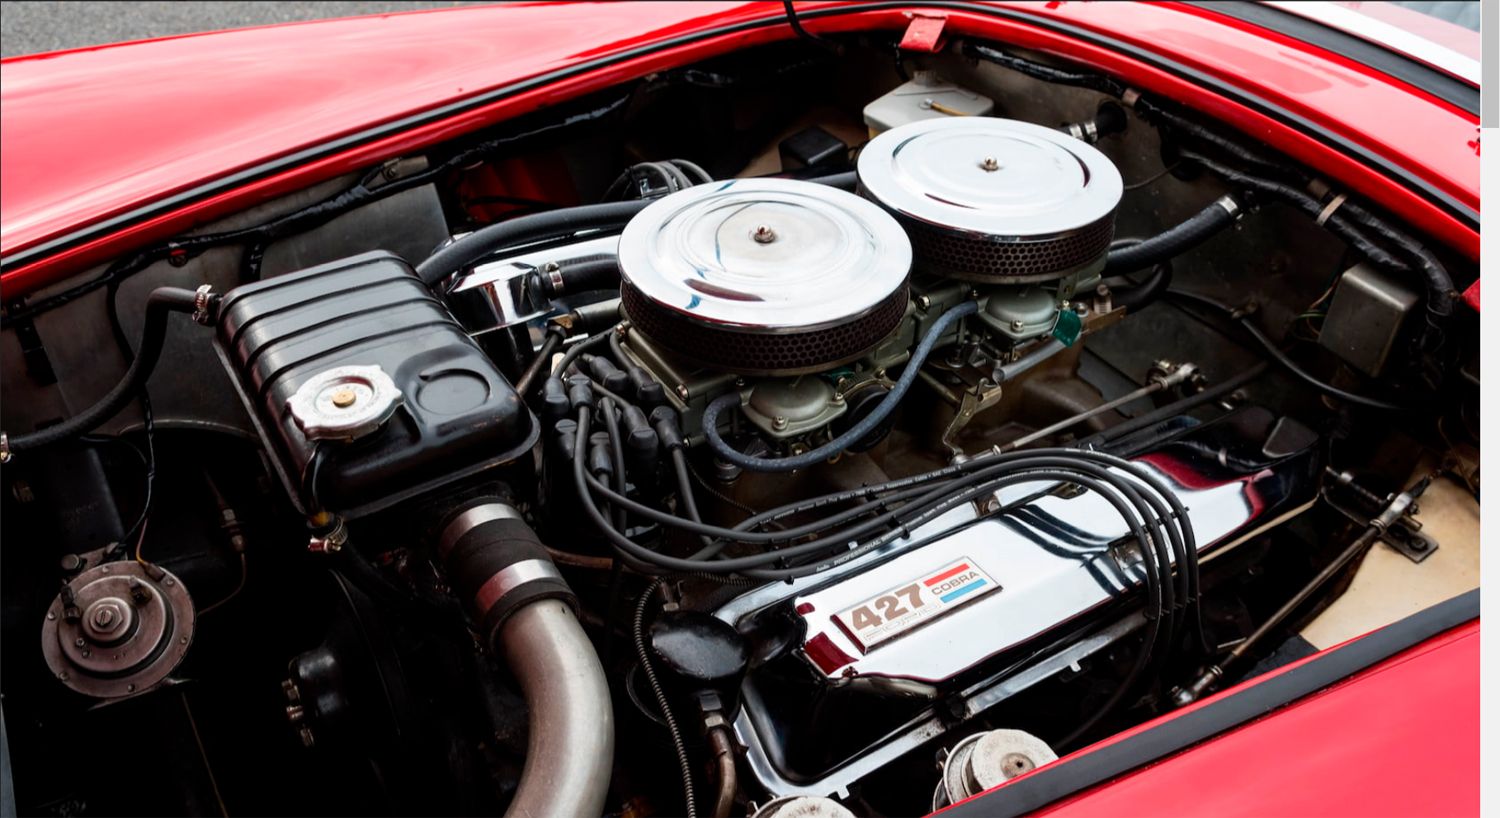 Ford produced a big block 427 ci engine used in the Mustang, Cobra and others.